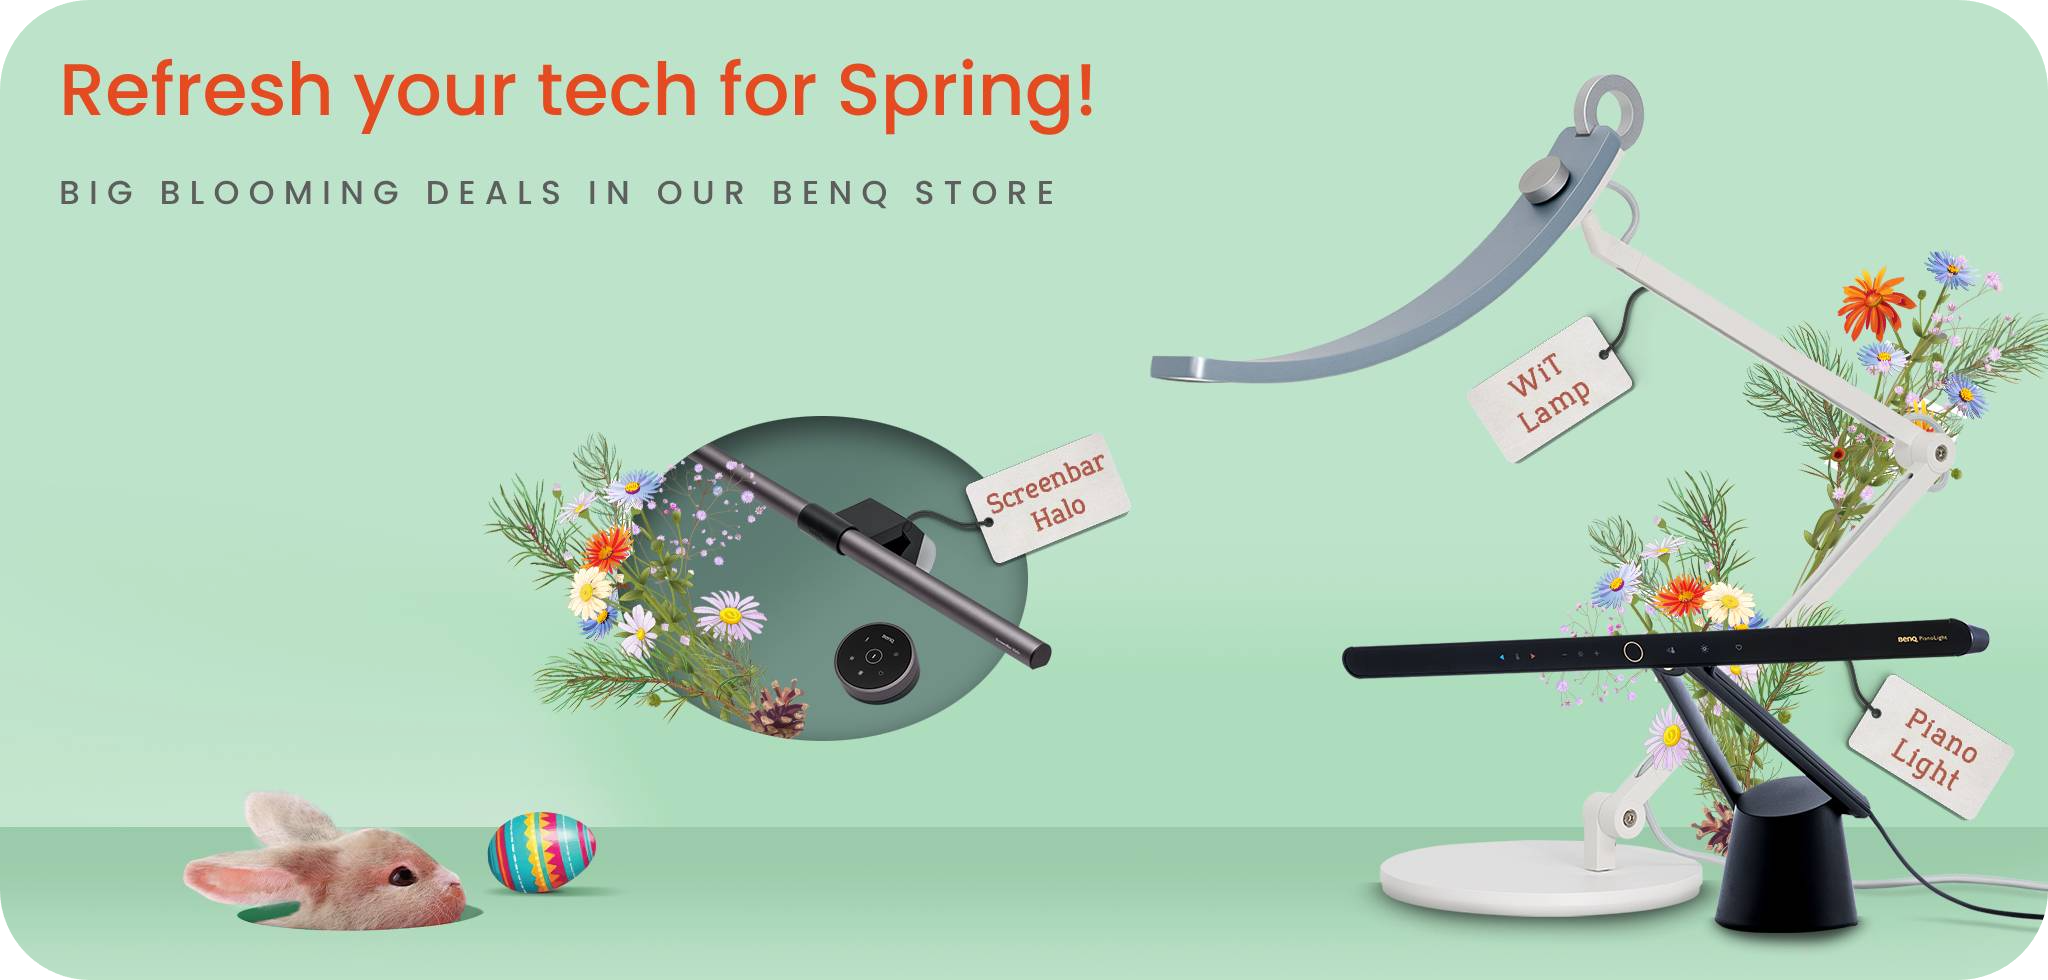 BenQ Spring Deals - Limited time offers, while stock lasts